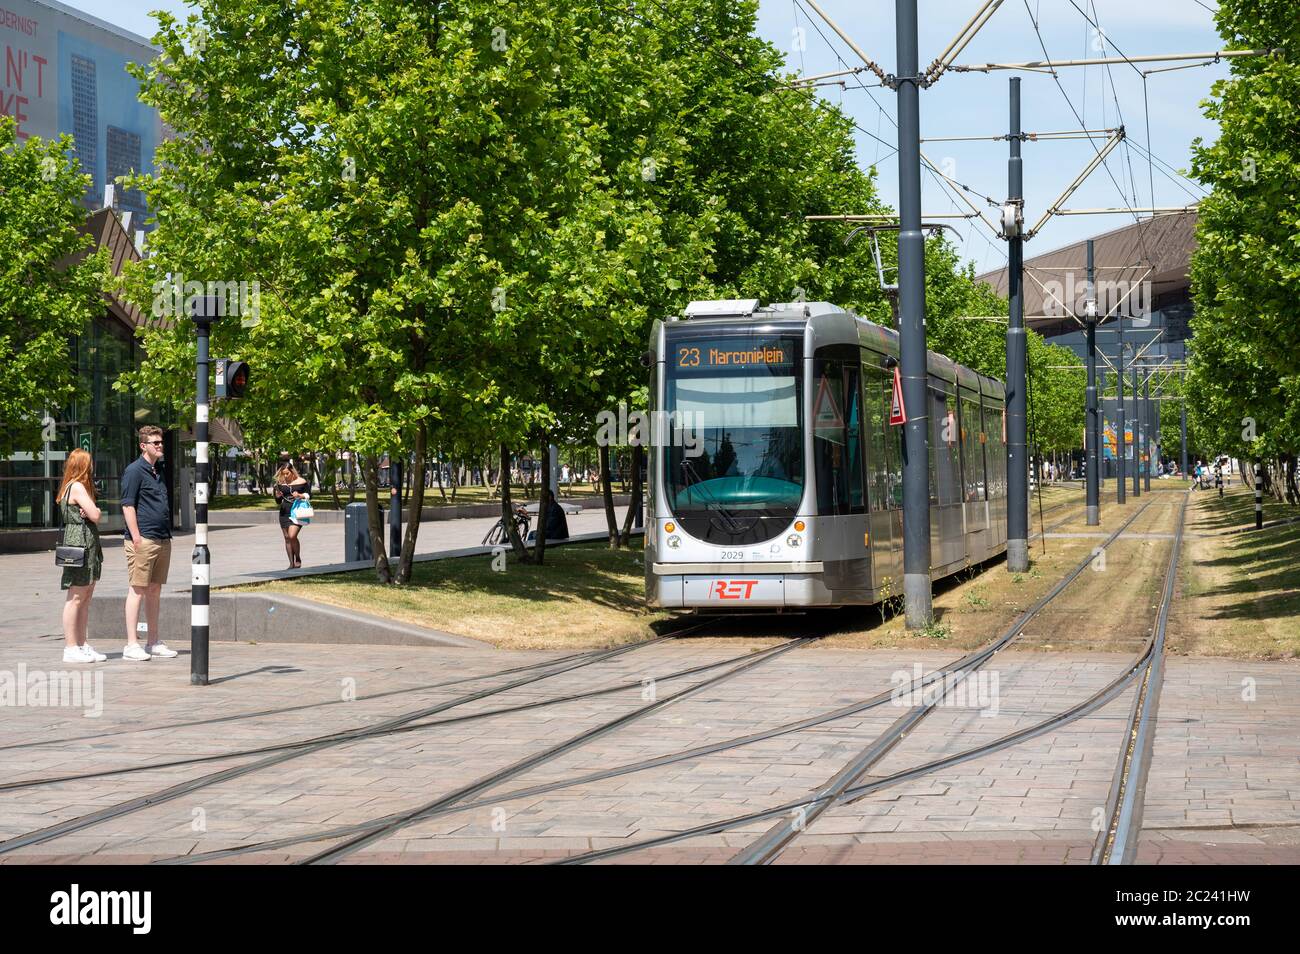 Tram on Kruisplein in the centre of Rotterdam, Netherlands. People visible. Stock Photo